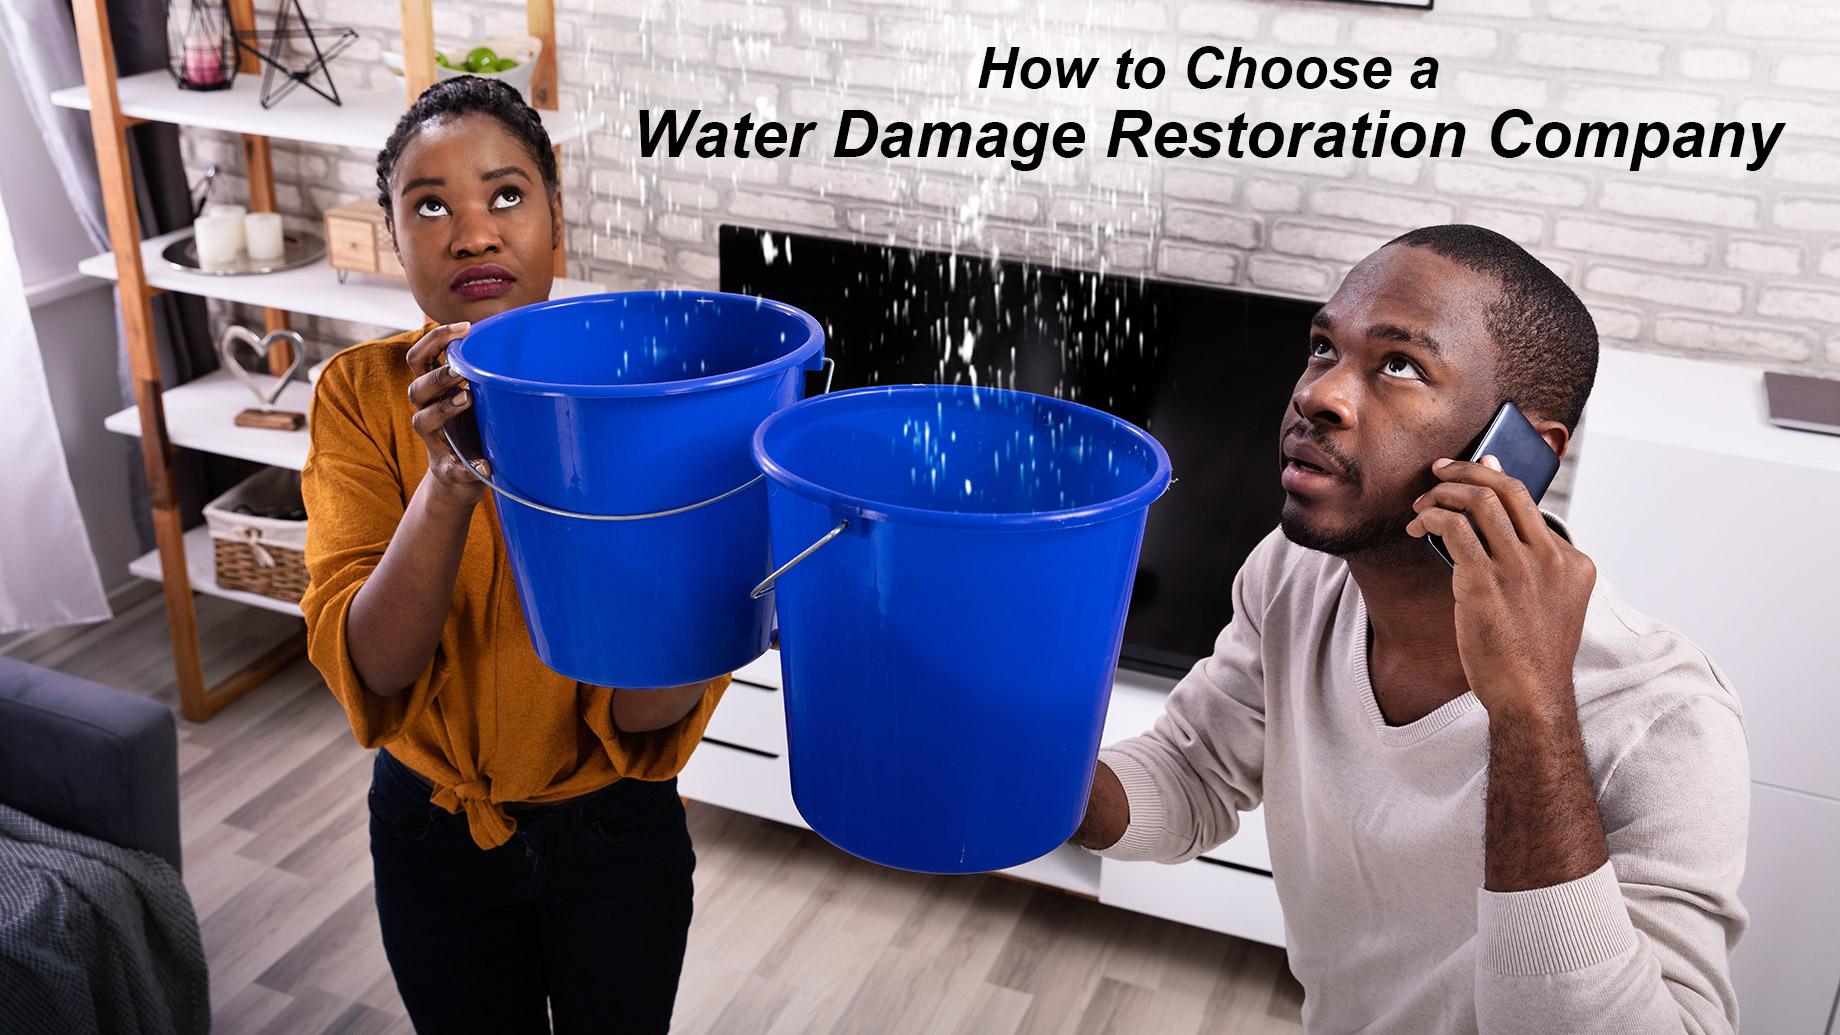 How to Choose a Water Damage Restoration Company